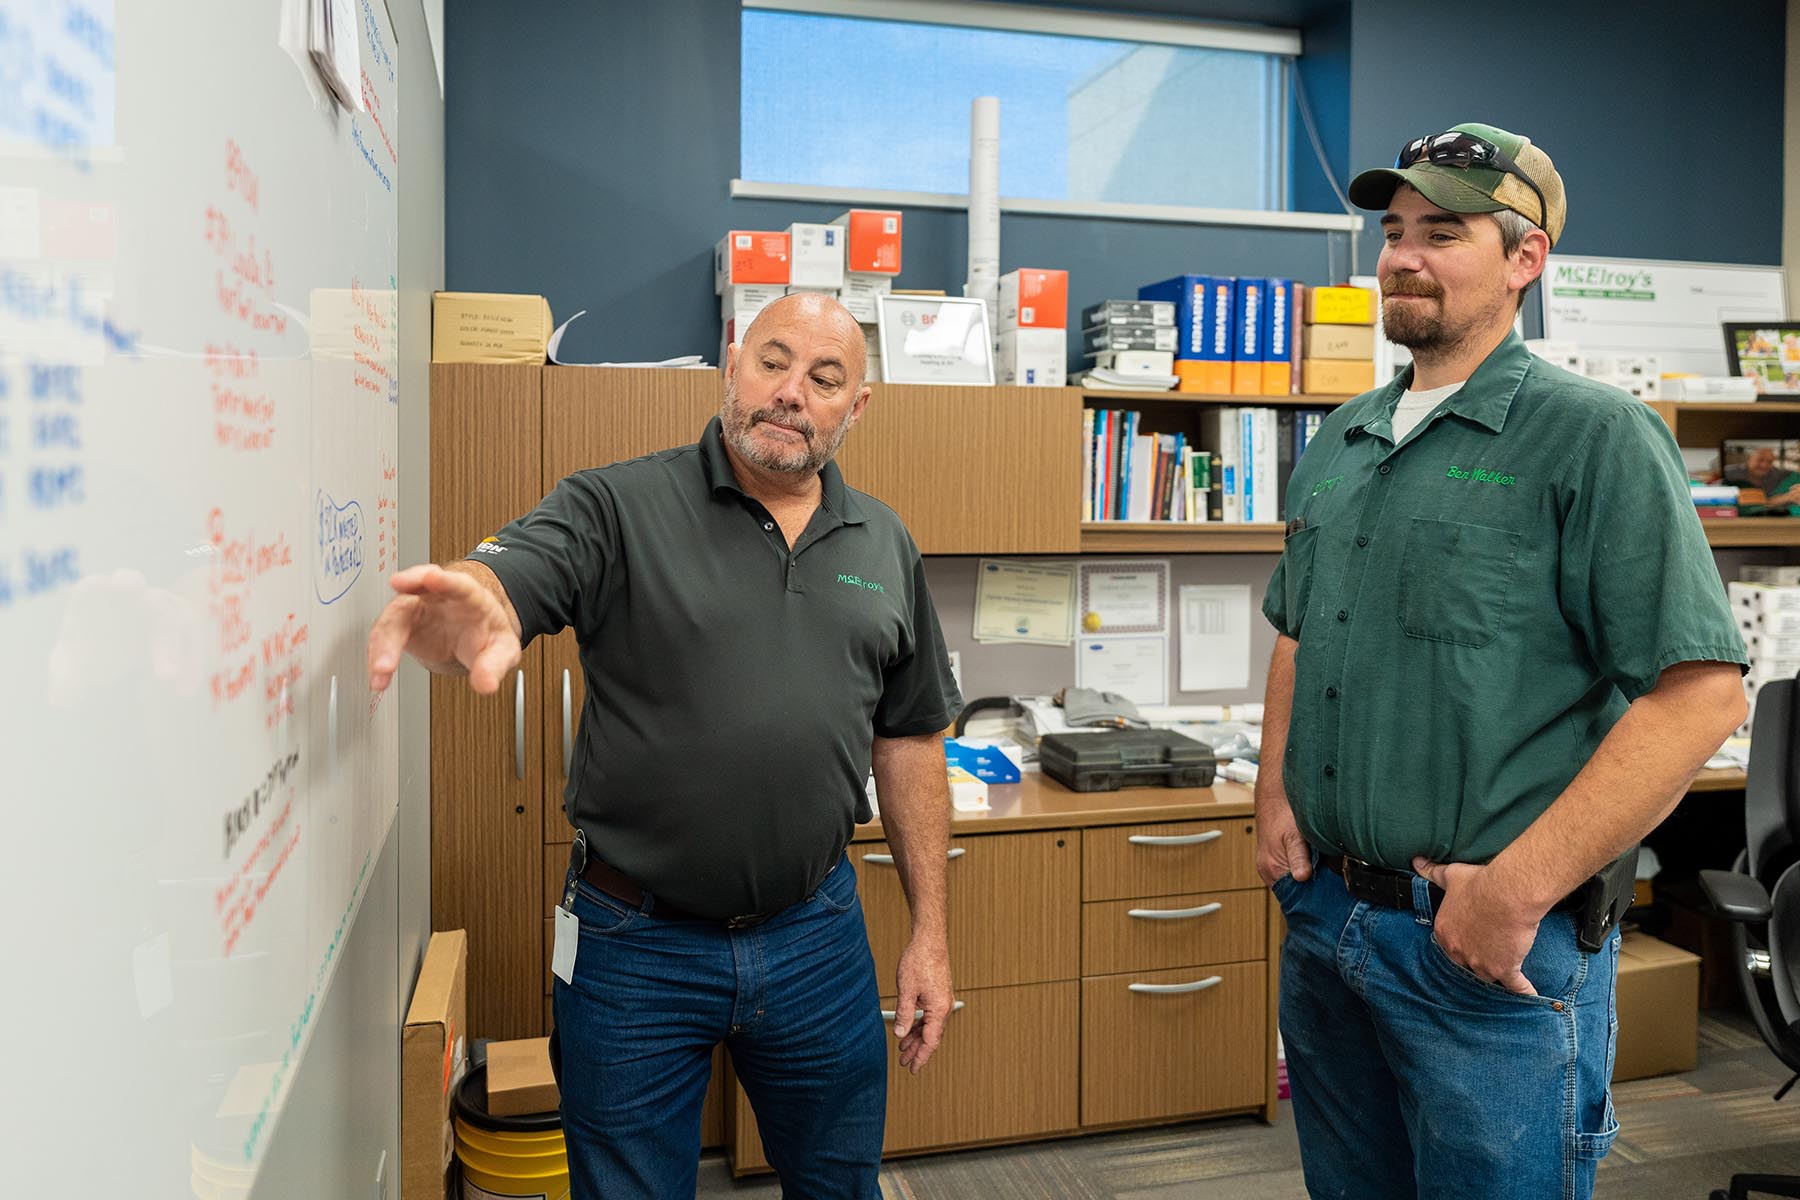 Greg Hunsicker, leader of McElroy’s residential HVAC department, and Ben Walker, McElroy’s residential HVAC technician, discuss current installation projects.